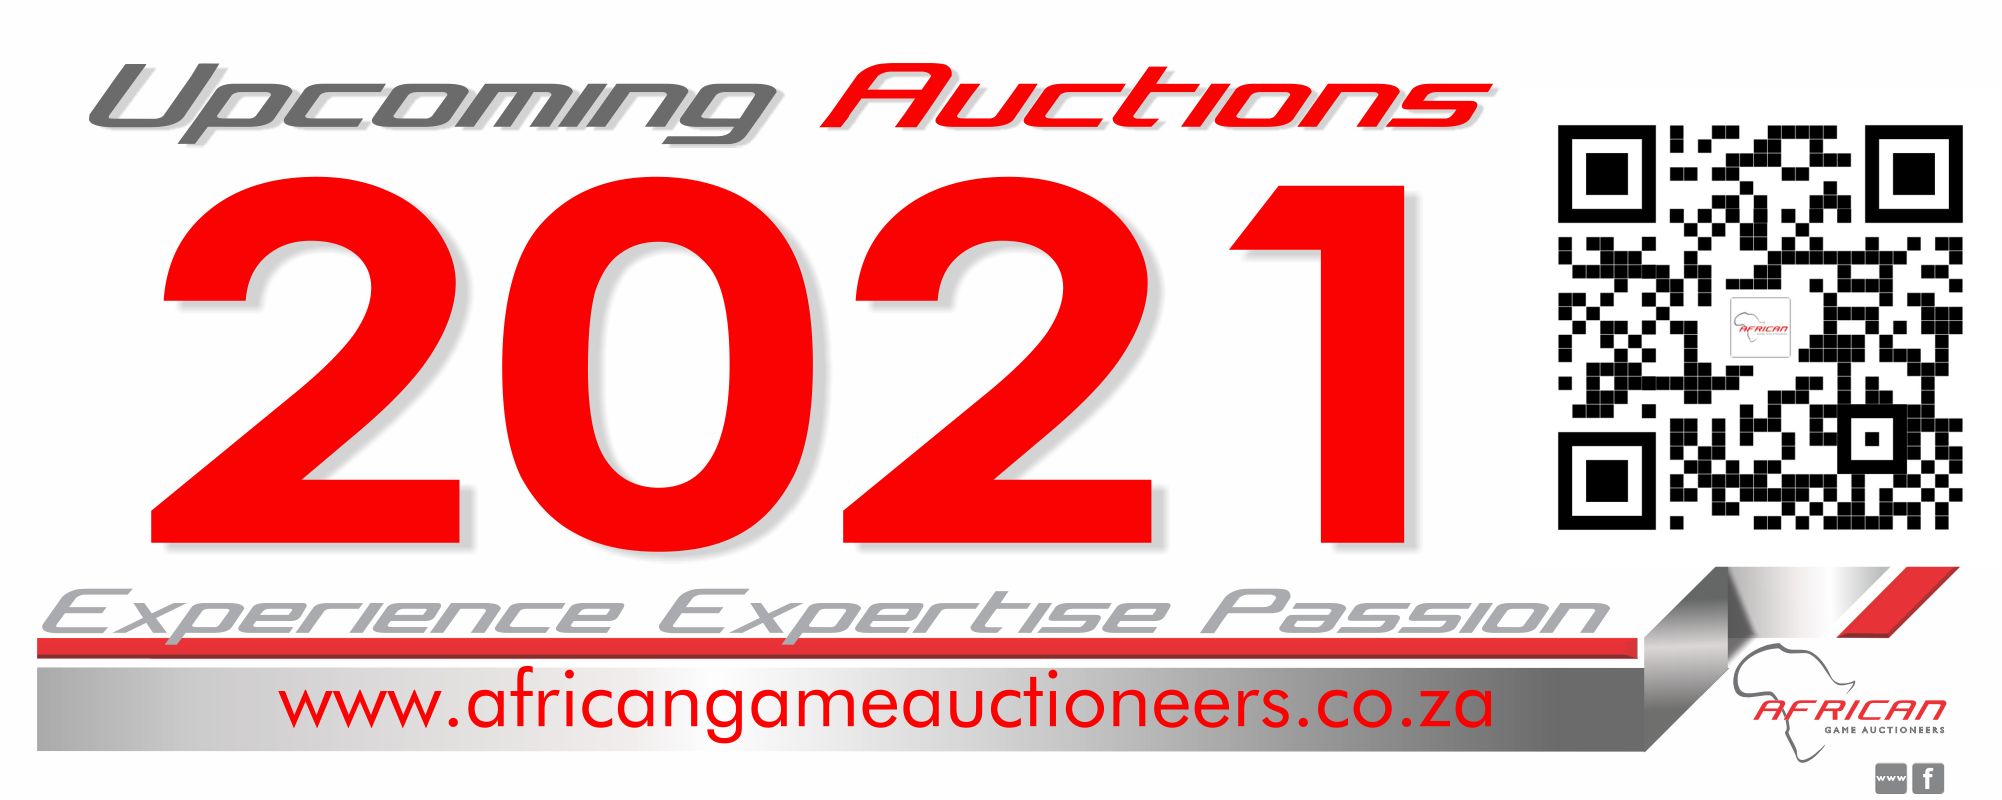 Upcoming auctions 2021